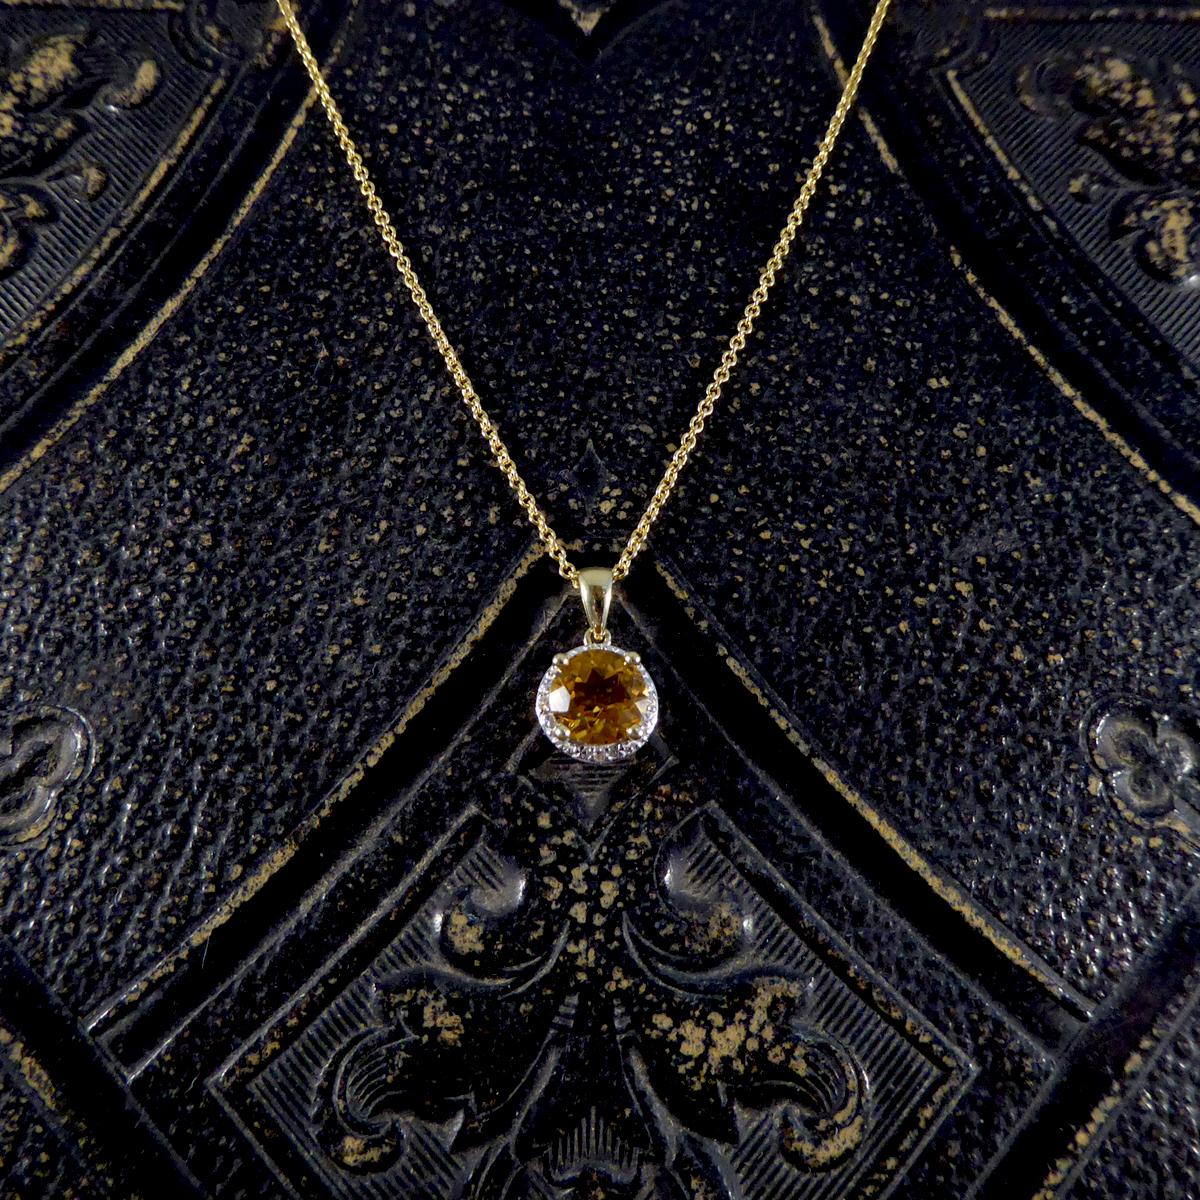 This lovely new necklaces features a Citrene gemstone centre with a cluster illusion halo set with four small Diamonds around the Citrene. This necklace has been hand crafted in 9ct Yellow Gold hanging on a 9ct Yellow Gold chain. The perfect